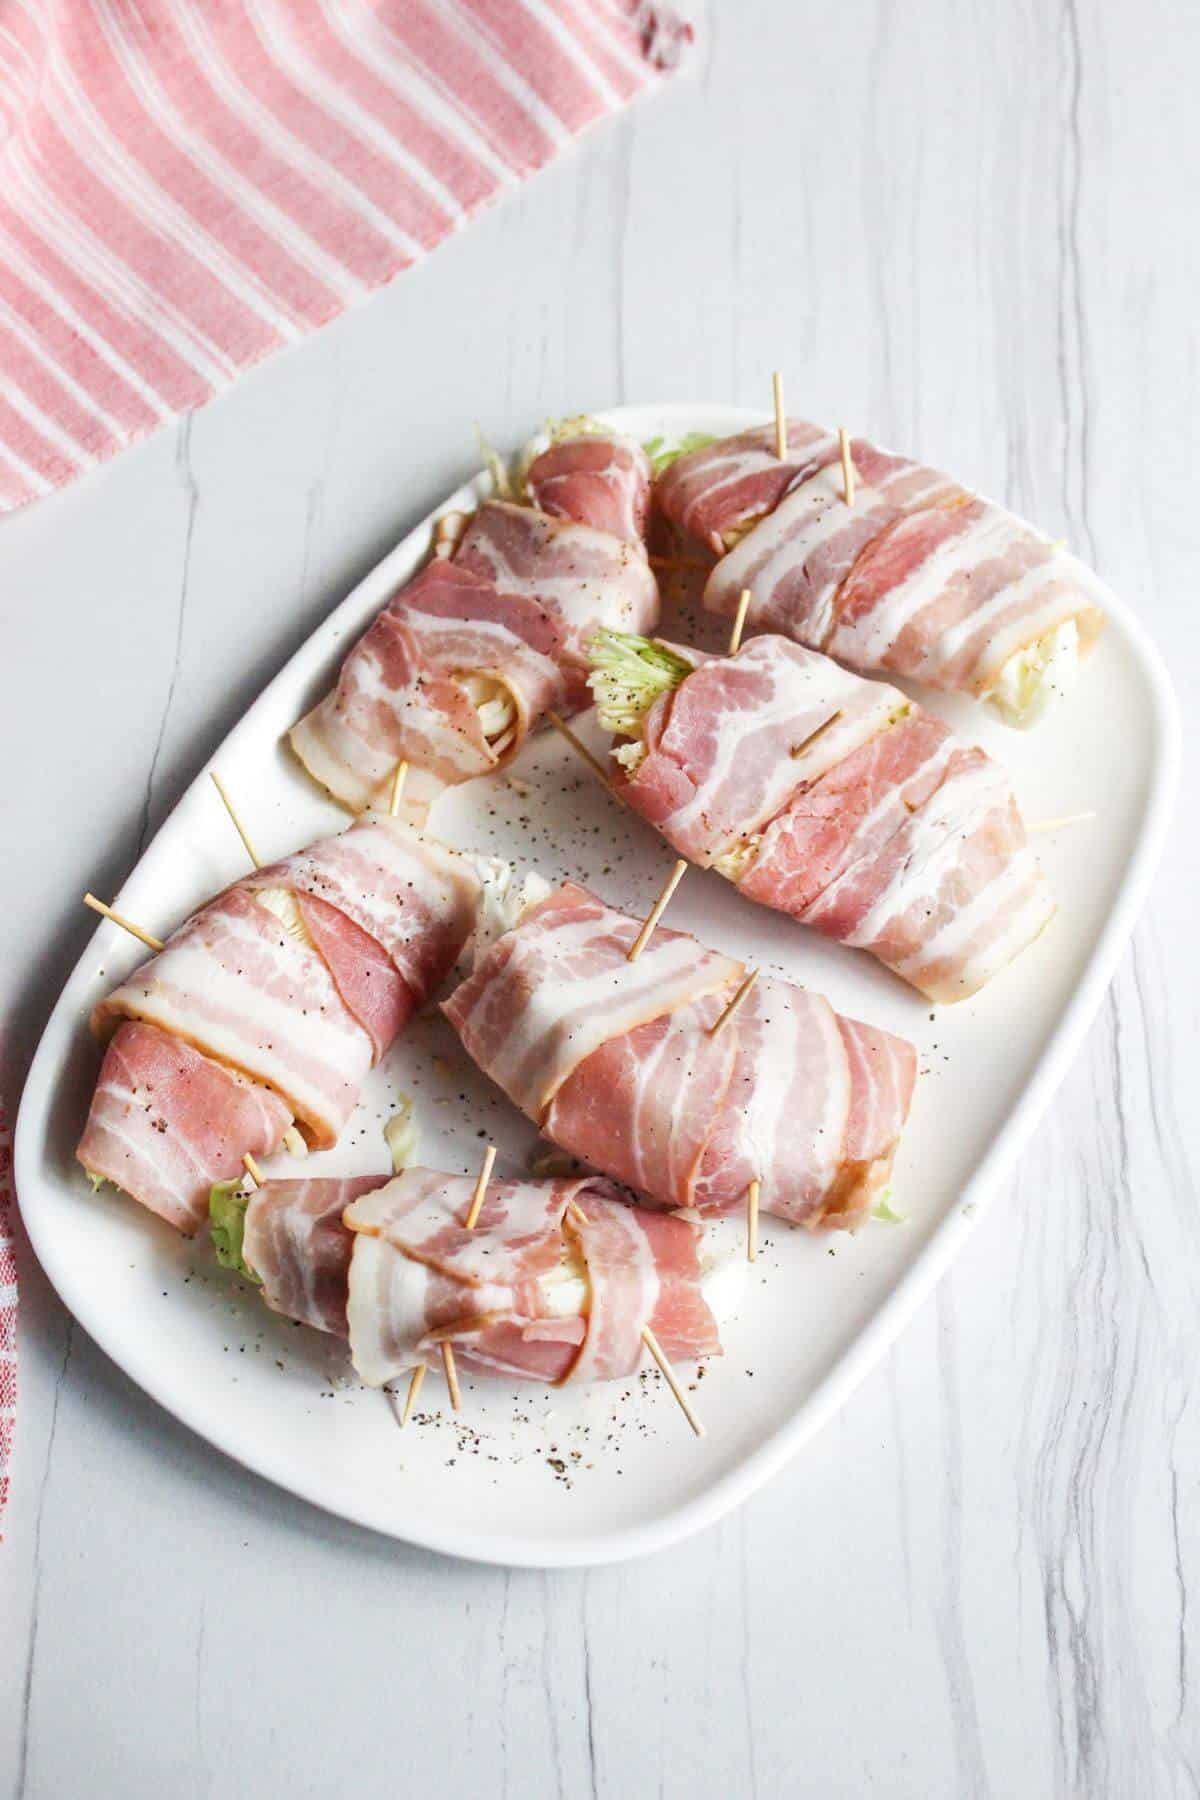 Seasoned cabbage wedges wrapped in bacon.